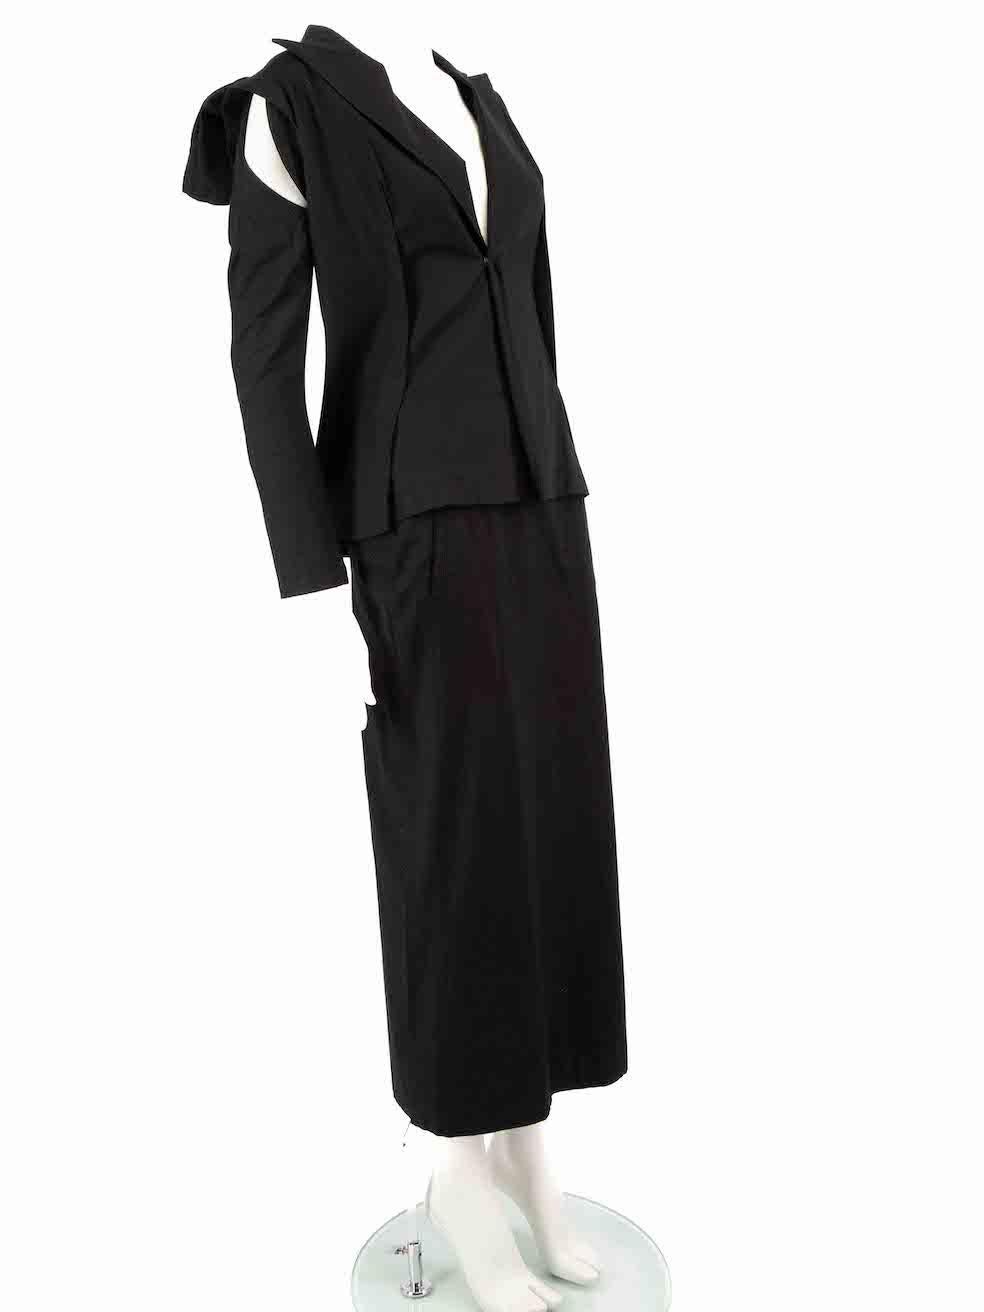 CONDITION is Very good. Minimal wear to set is evident. Minimal wear to the rear slit of the skirt with undoing of the stitching at the top of the seam on this used Yohji Yamamoto designer resale item.
 
 
 
 Details
 
 
 Black
 
 Cotton
 
 Blazer